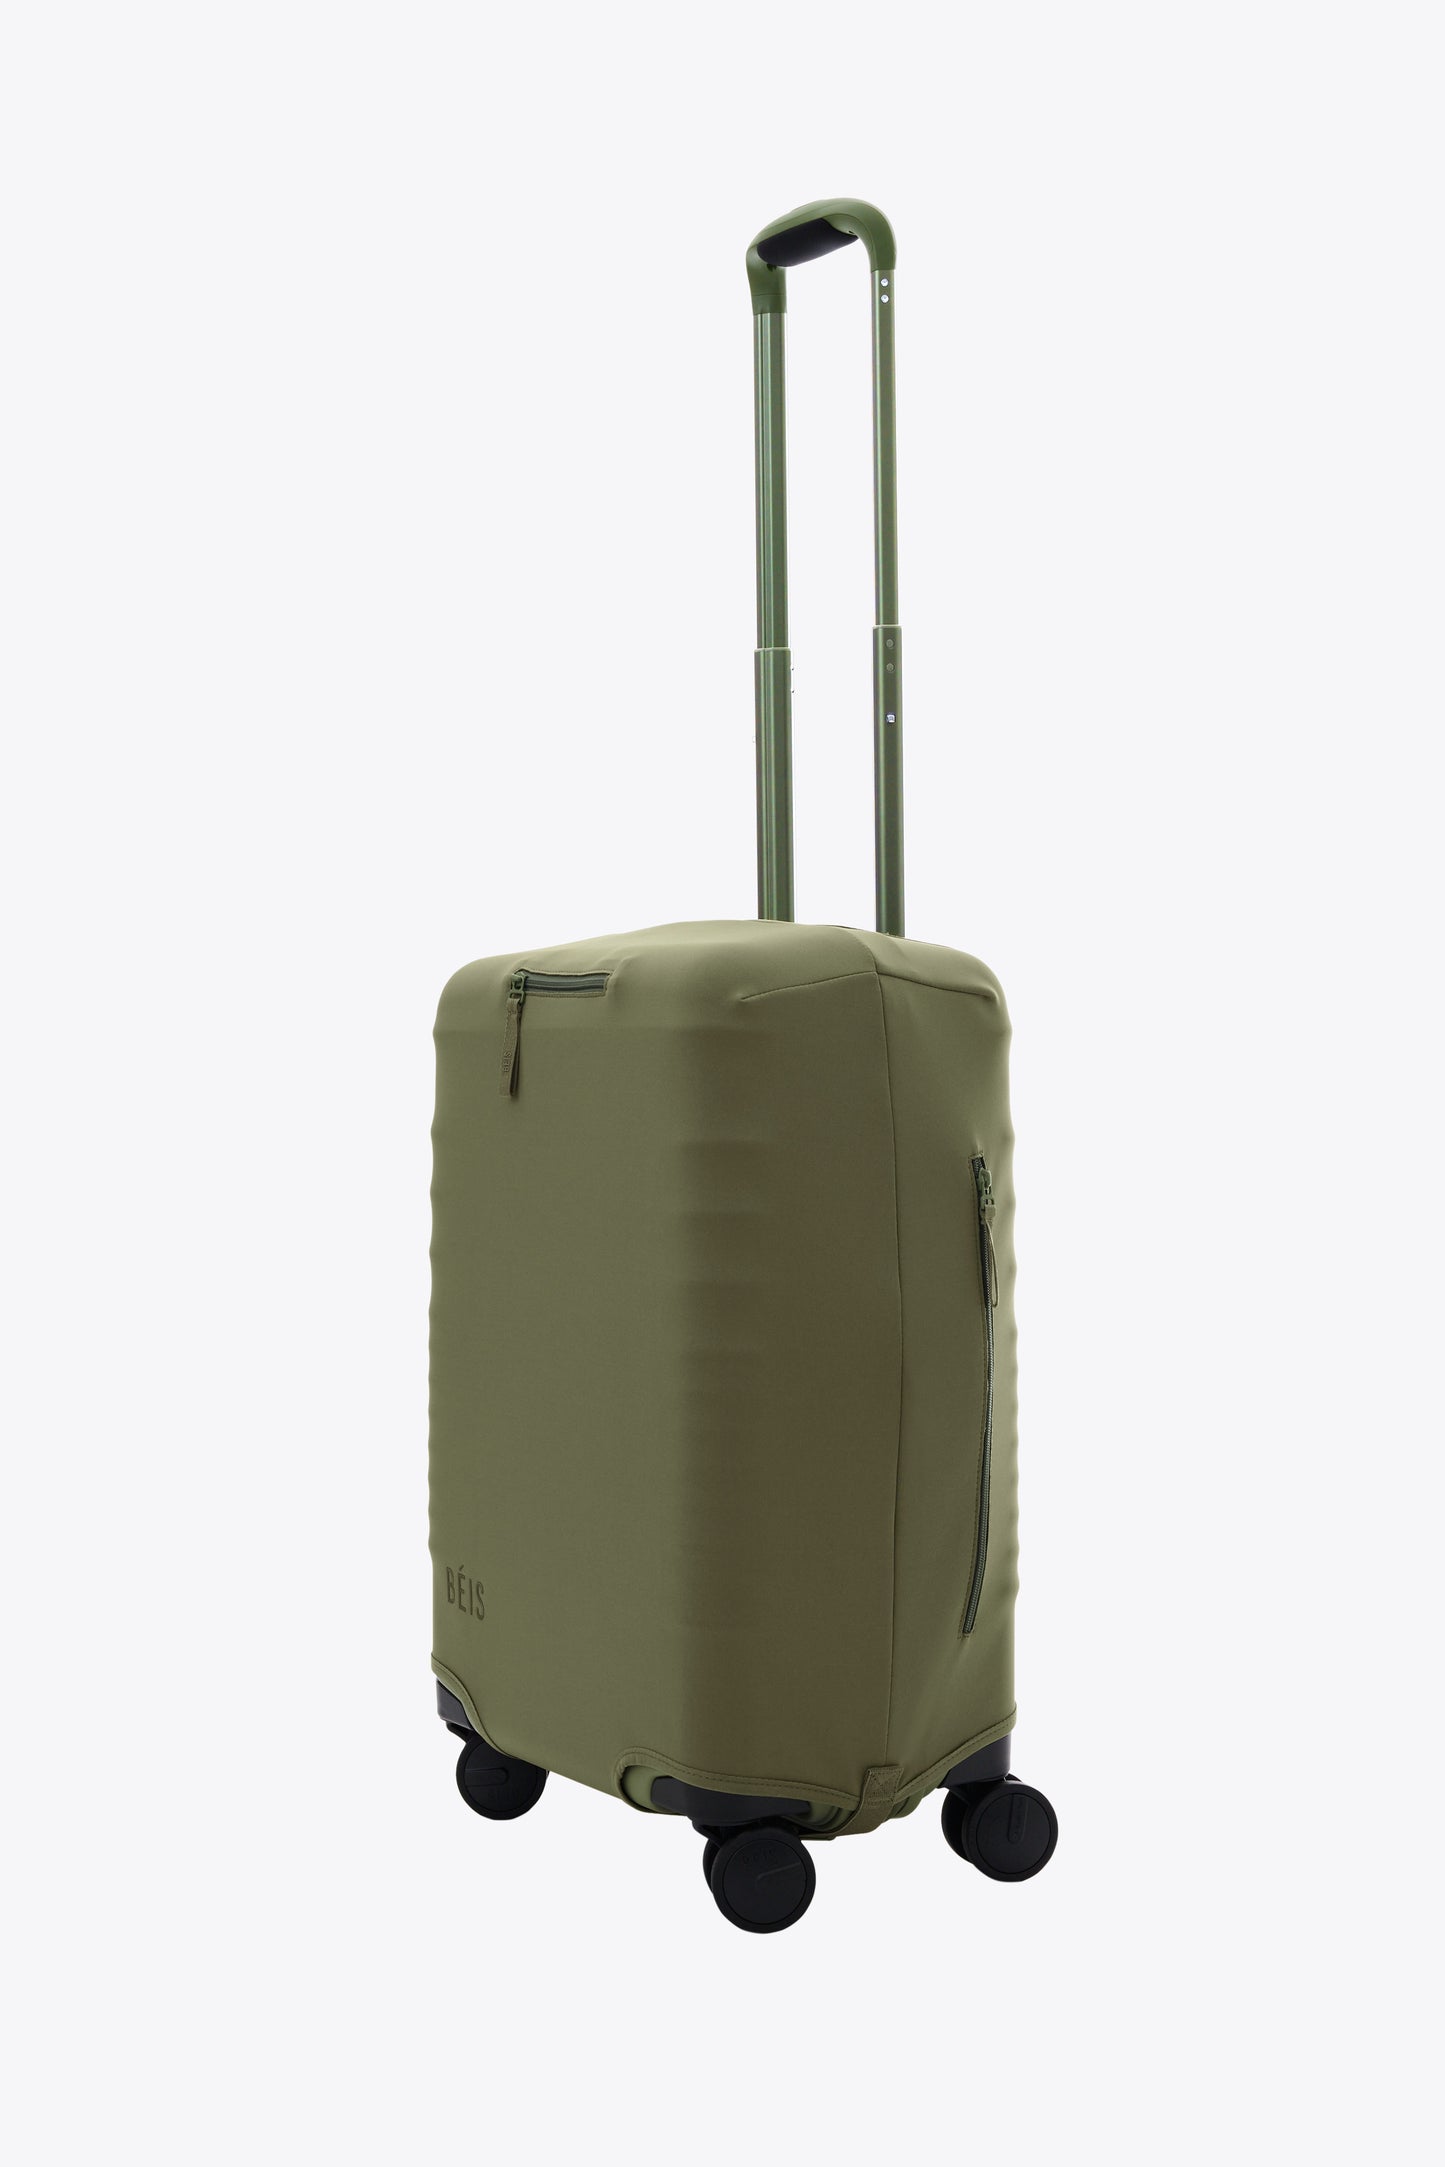 The Carry-On Luggage Cover in Olive